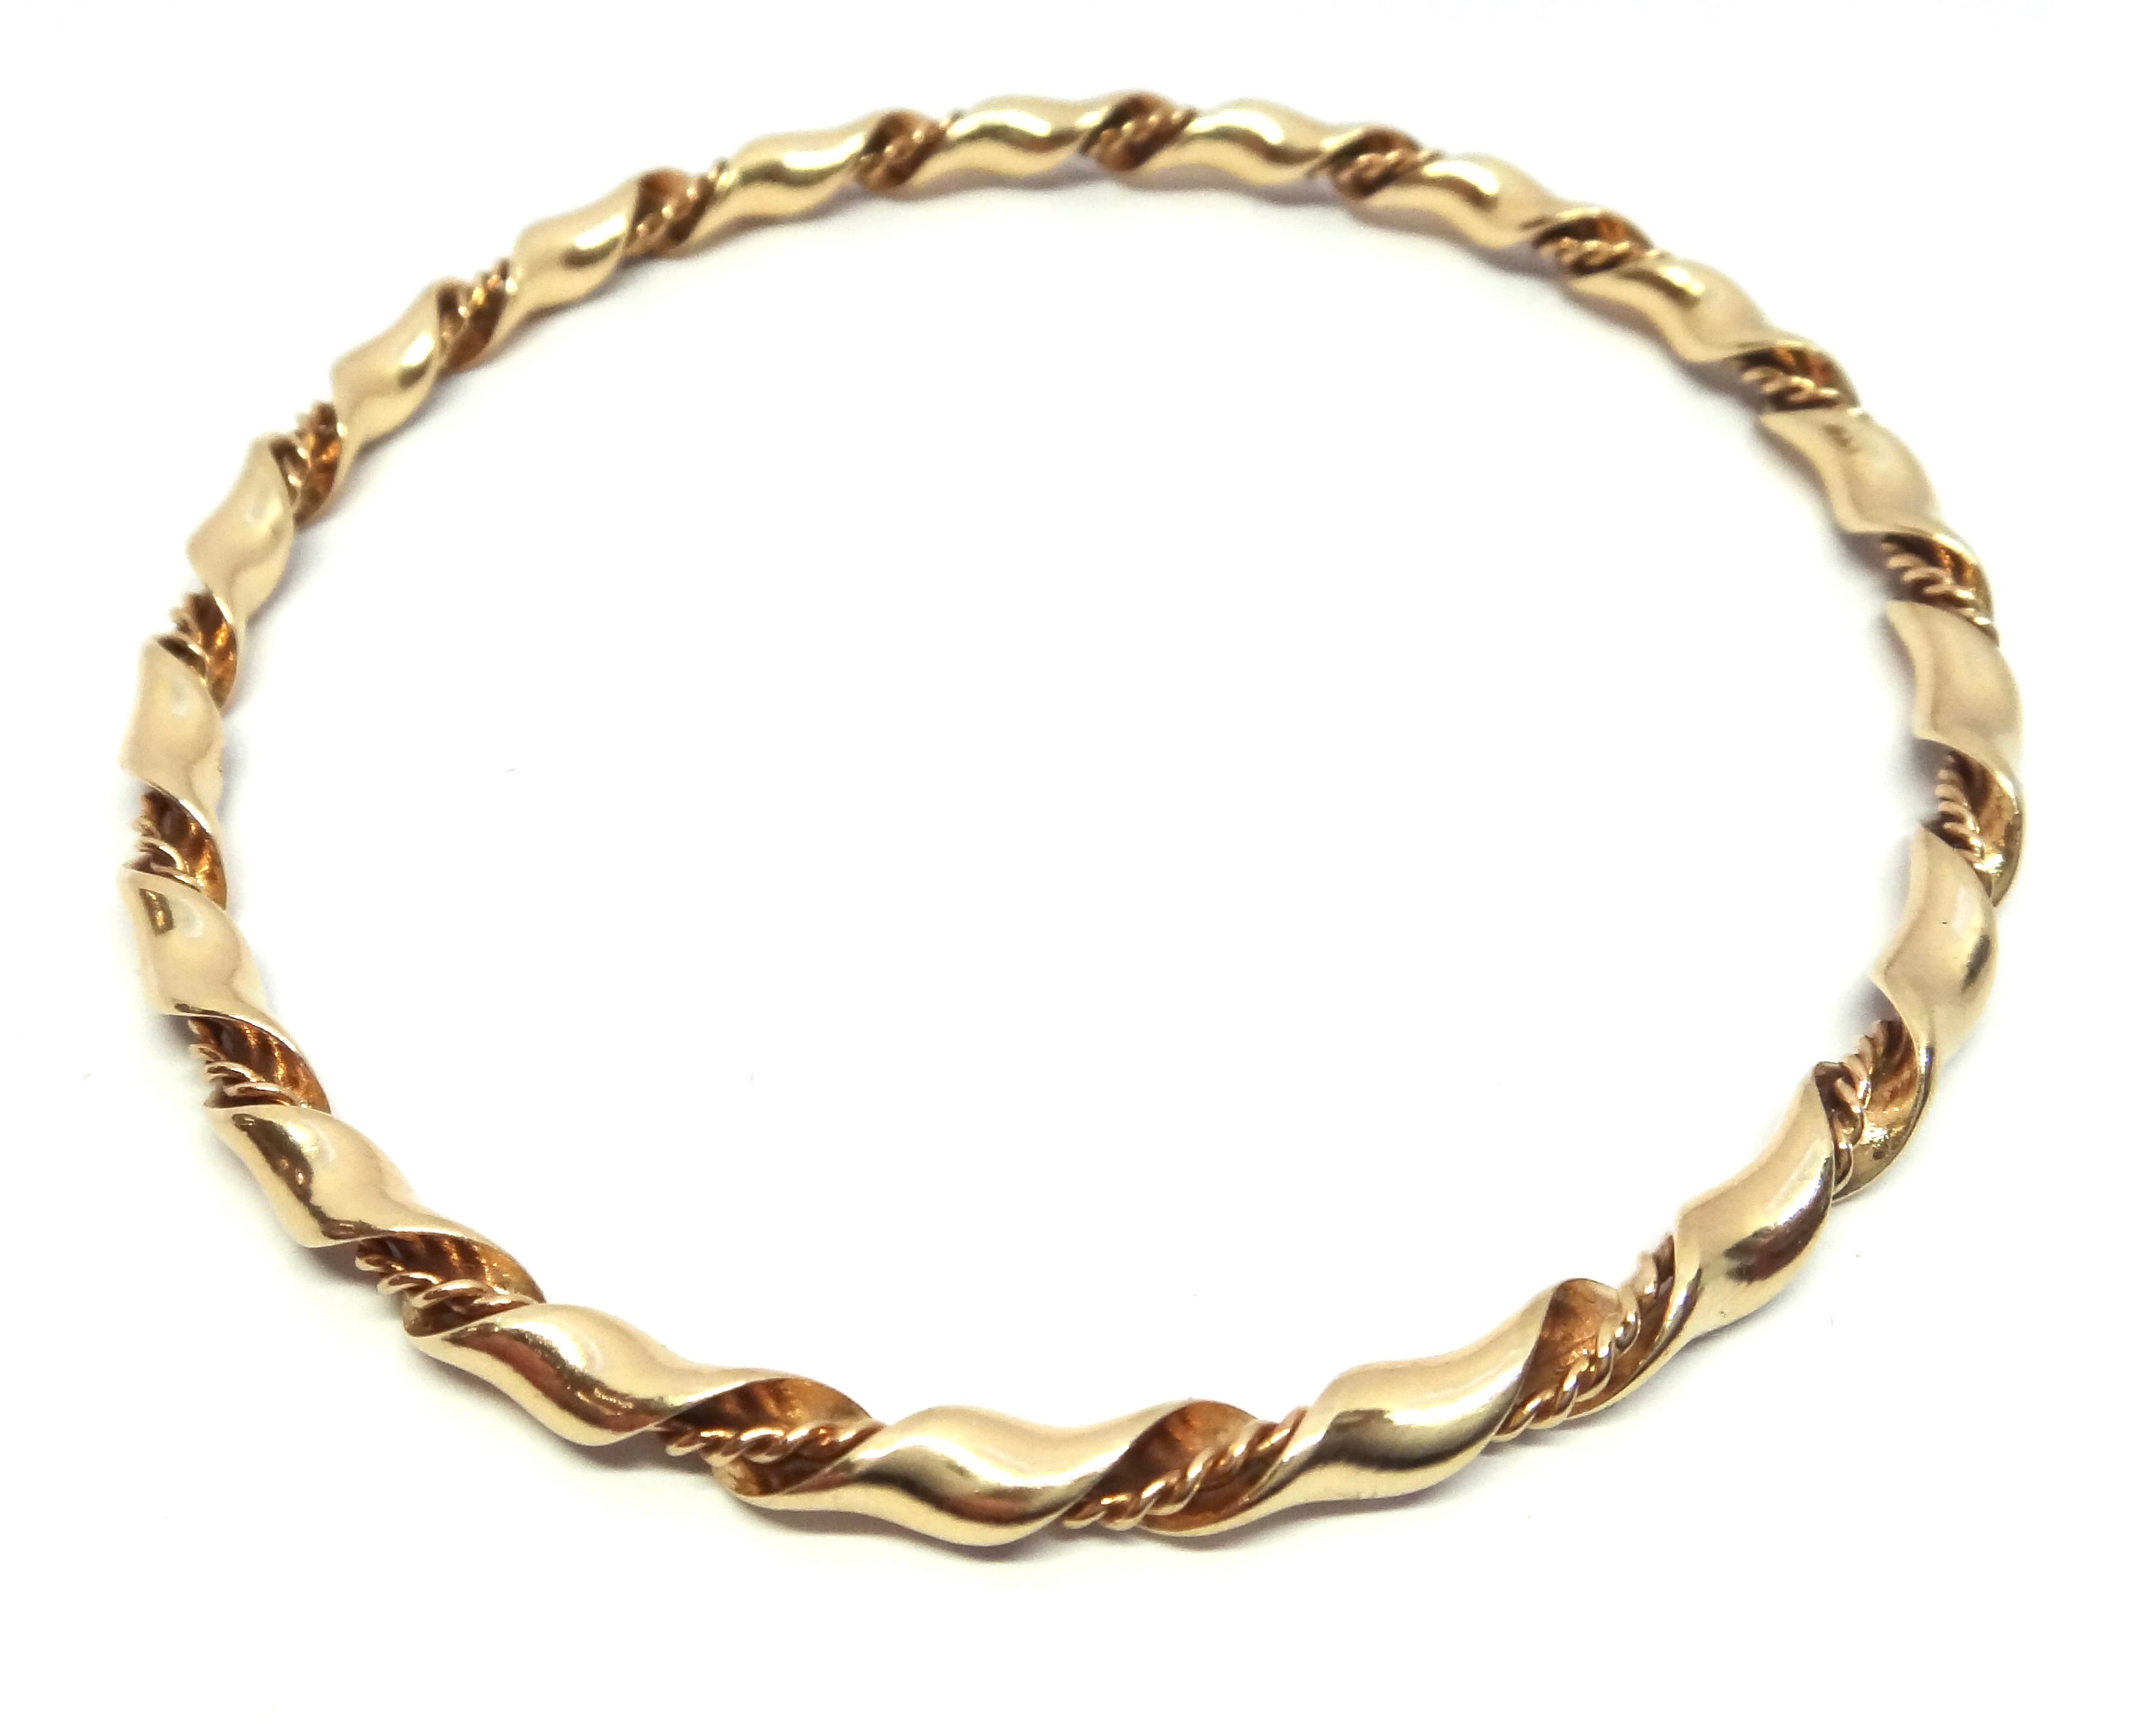 Solid 9ct Yellow GOLD Twisted Bangle